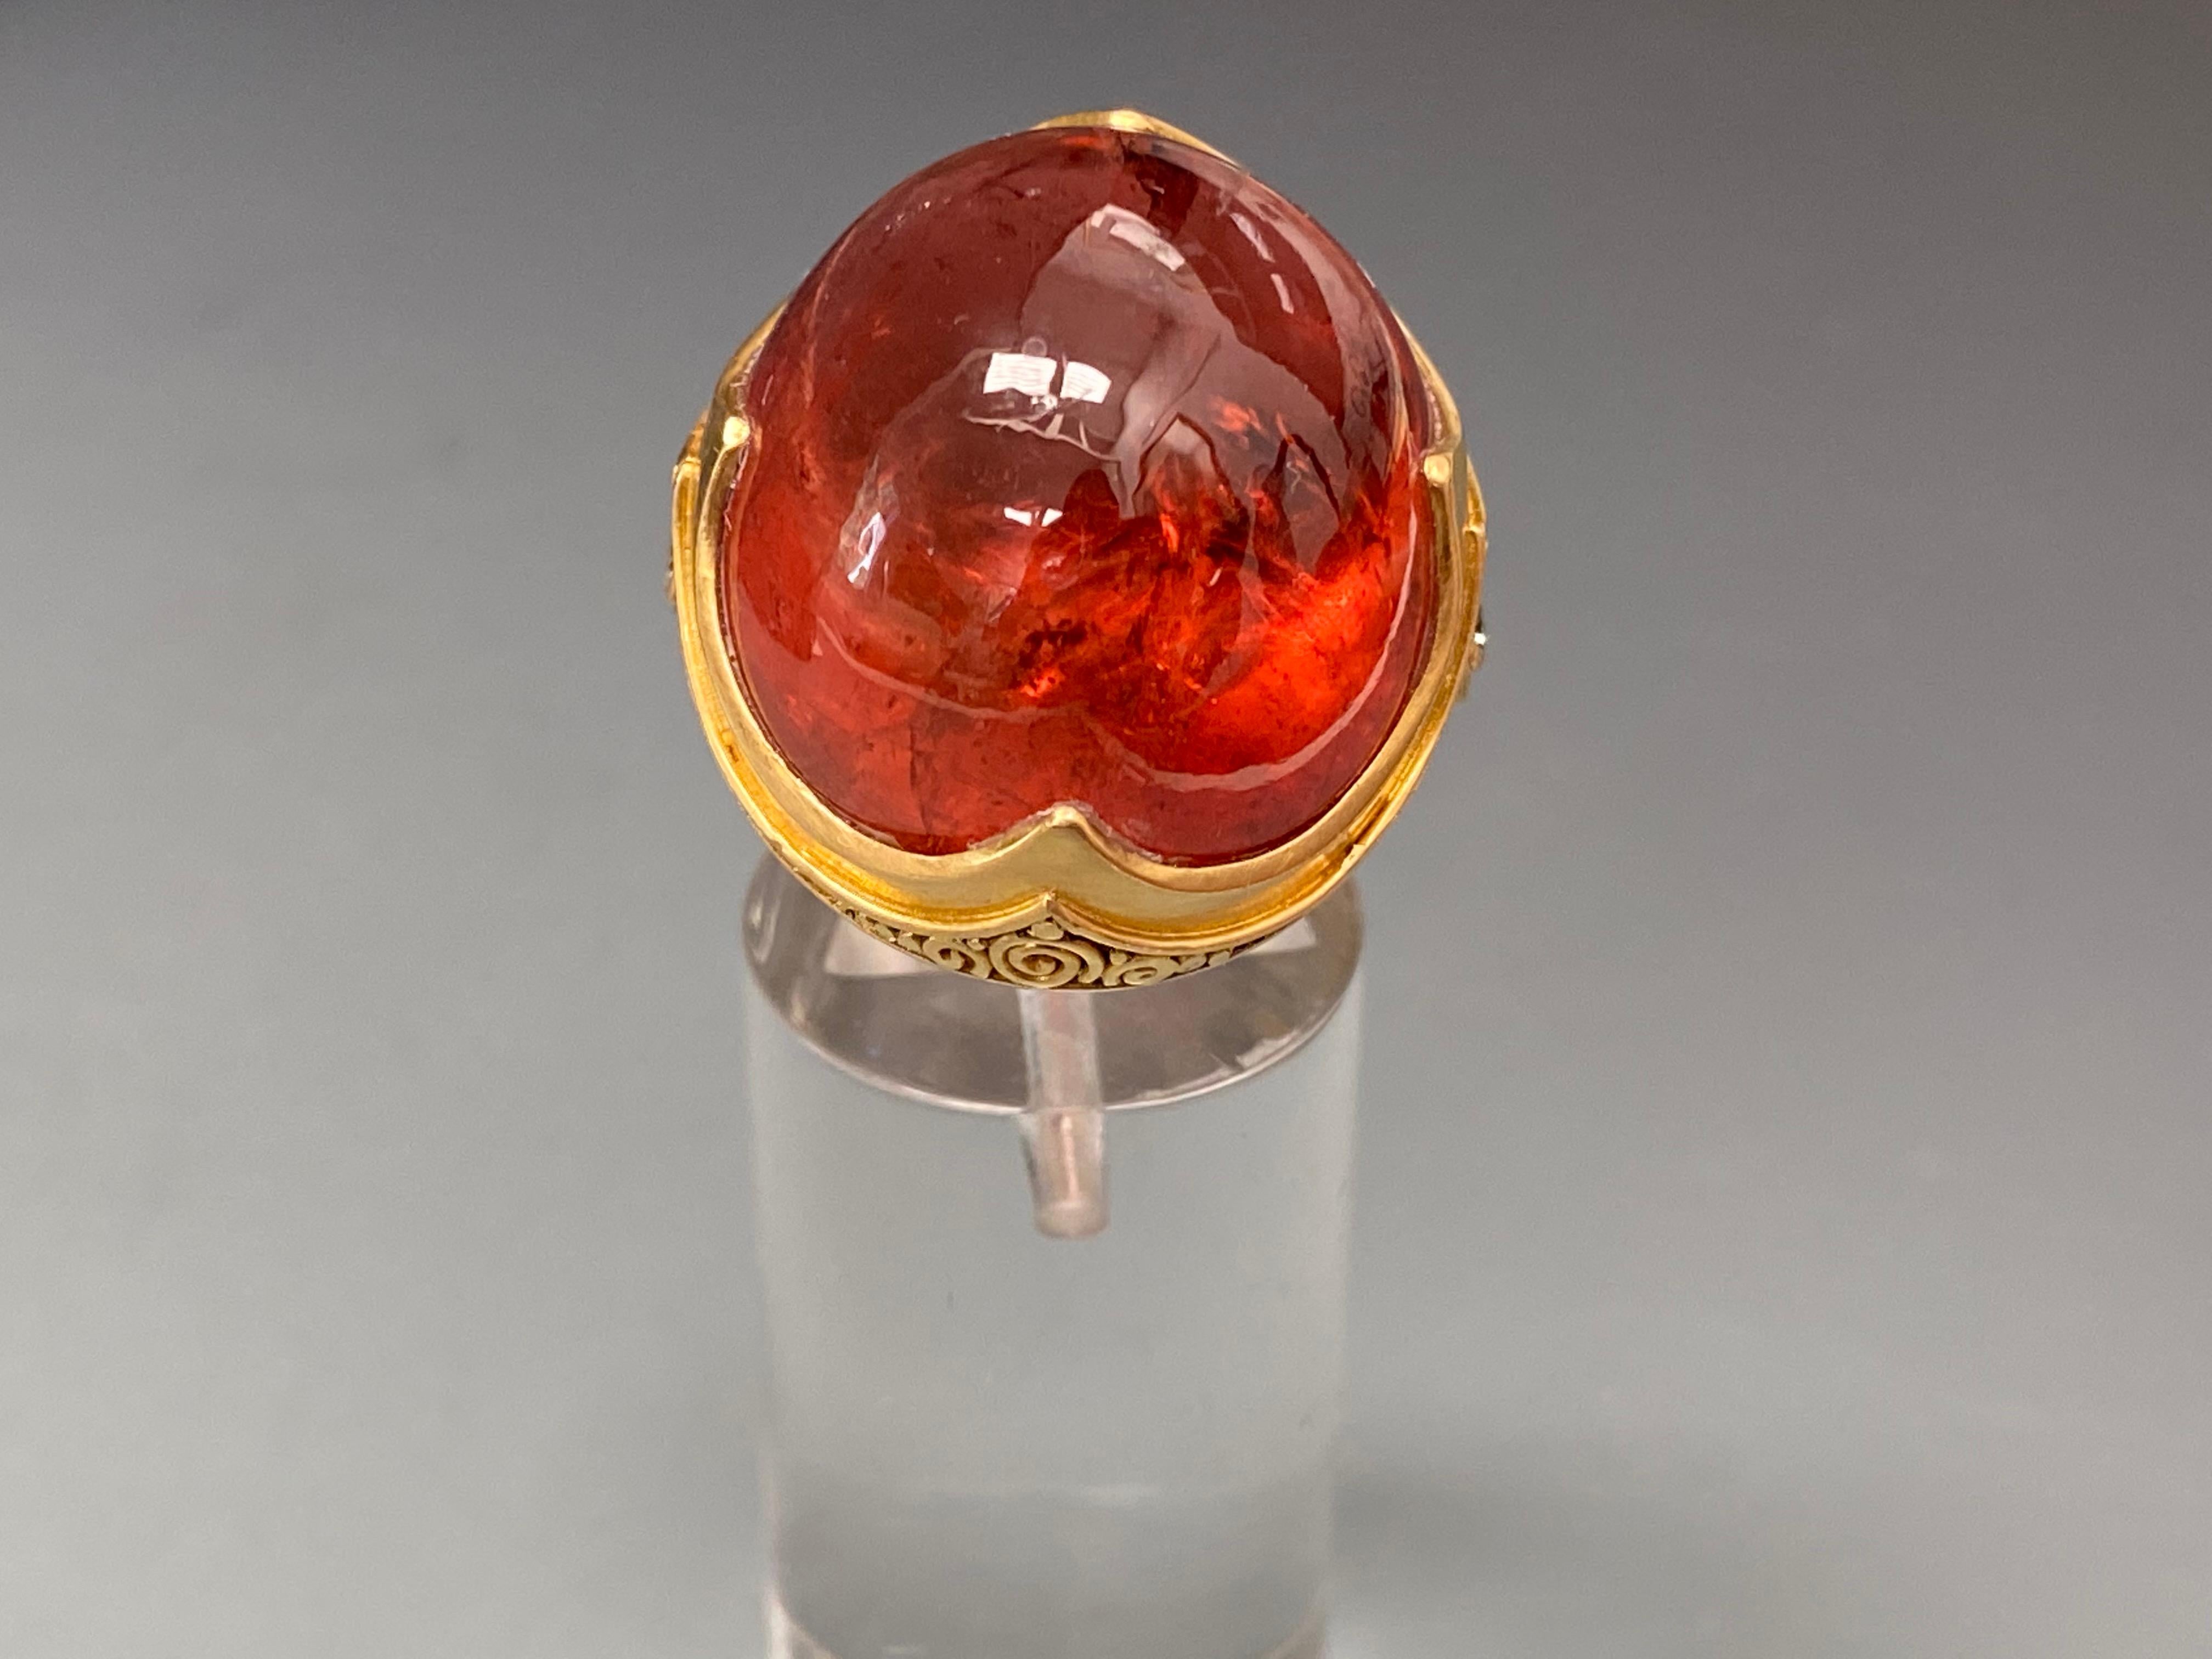 A deep rich orange-pink gumdrop of Brazilian tourmaline, 20x22 mm in size is the centerpiece of this beautiful showstopper ring by Steven Battelle.  Accented with two 2mm flanking diamonds and inset scroll wire work in a signature 